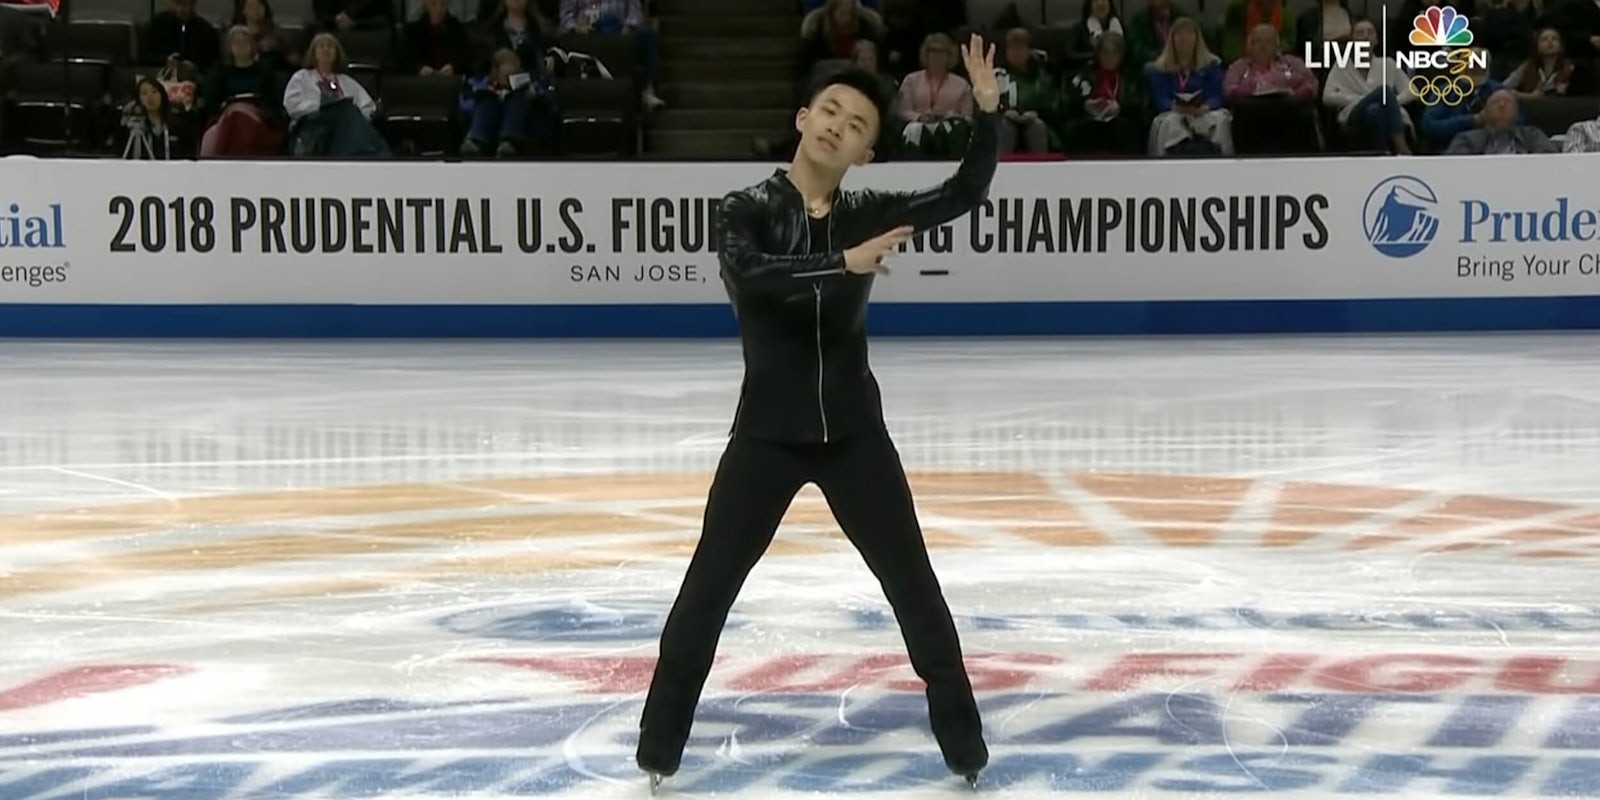 Jimmy Ma skates to 'Turn Down For What' at the 2018 US Nationals